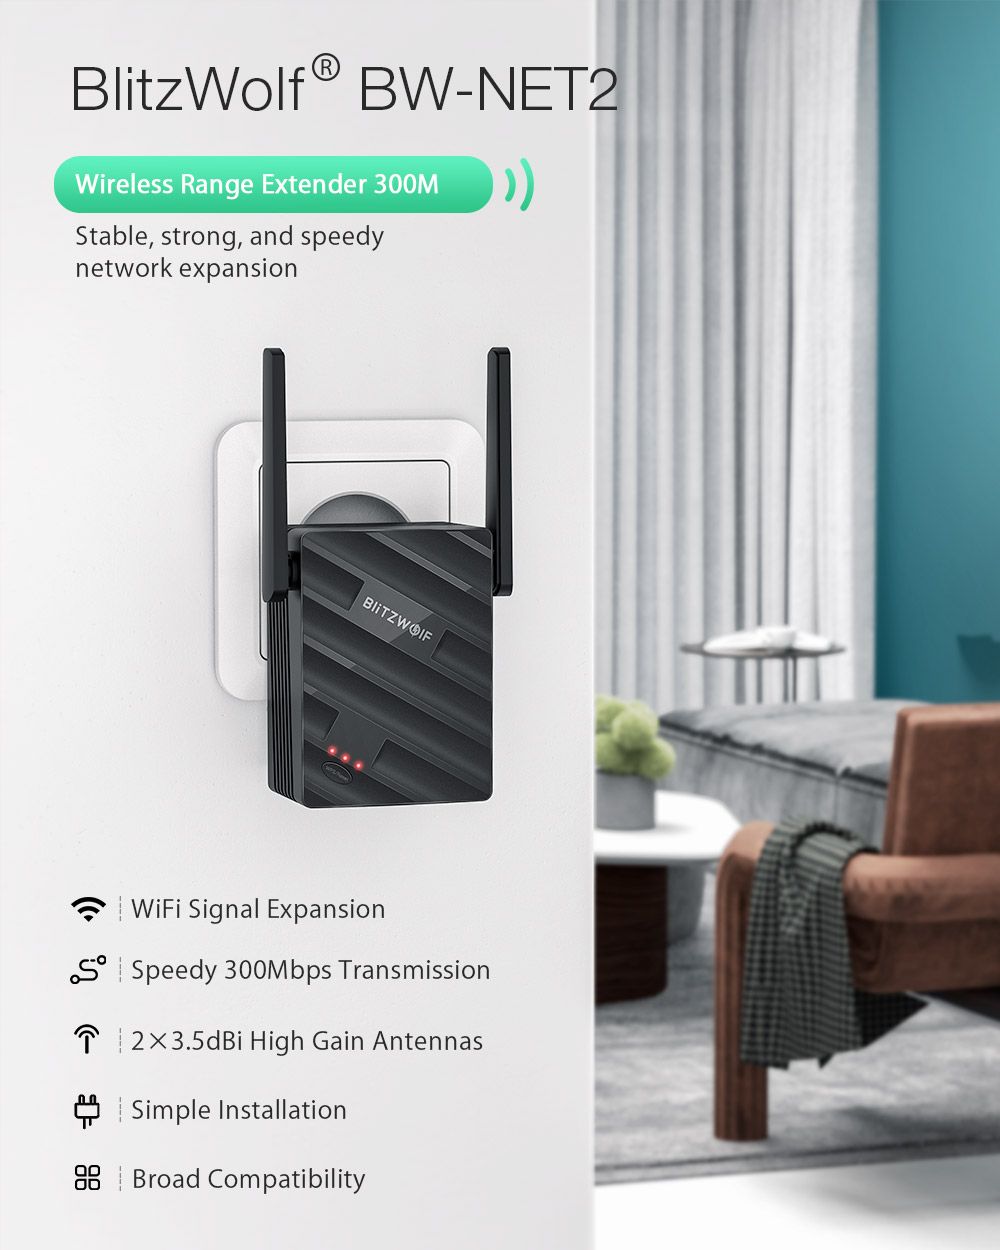 BlitzWolfreg-BW-NET2-Wireless-Repeater-300Mbps-Wireless-Range-Extender-Supports-64-Devices-Portable--1707041